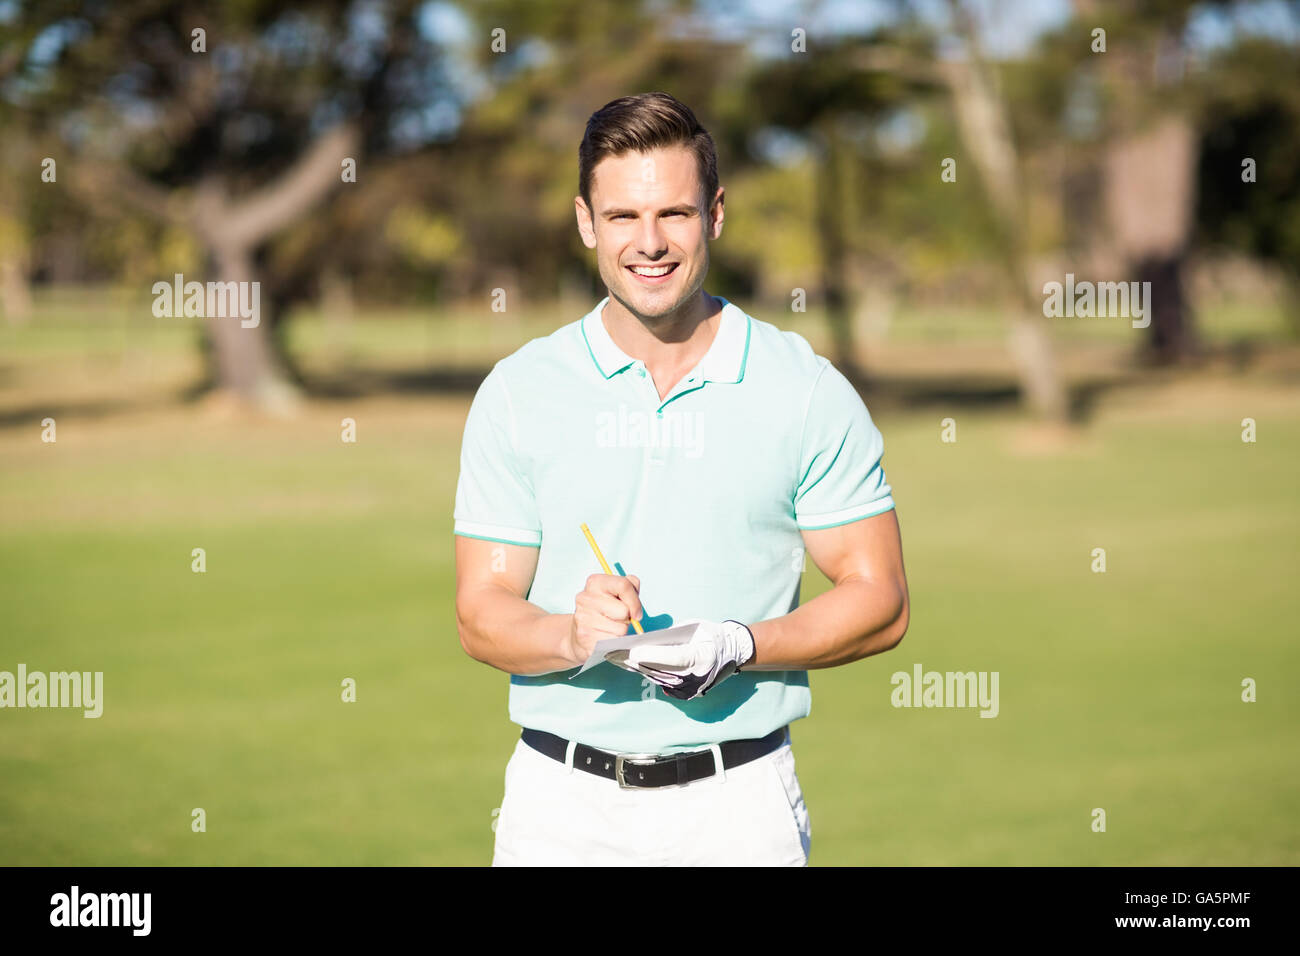 Portrait of smiling golfer with score card Stock Photo